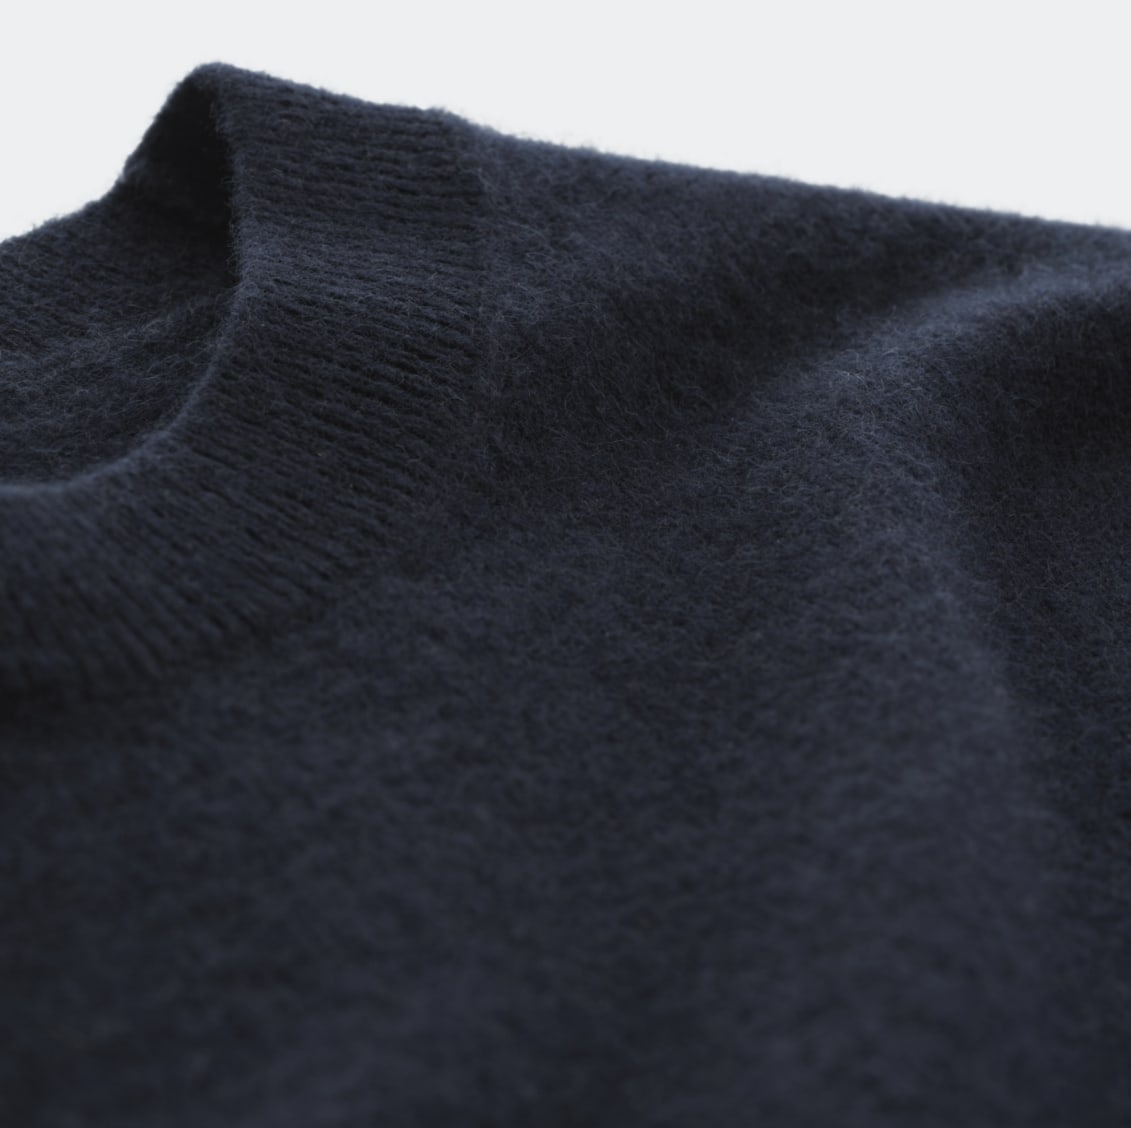 Knitwear collection | Merino, cashmere, and lambswool jumpers and ...